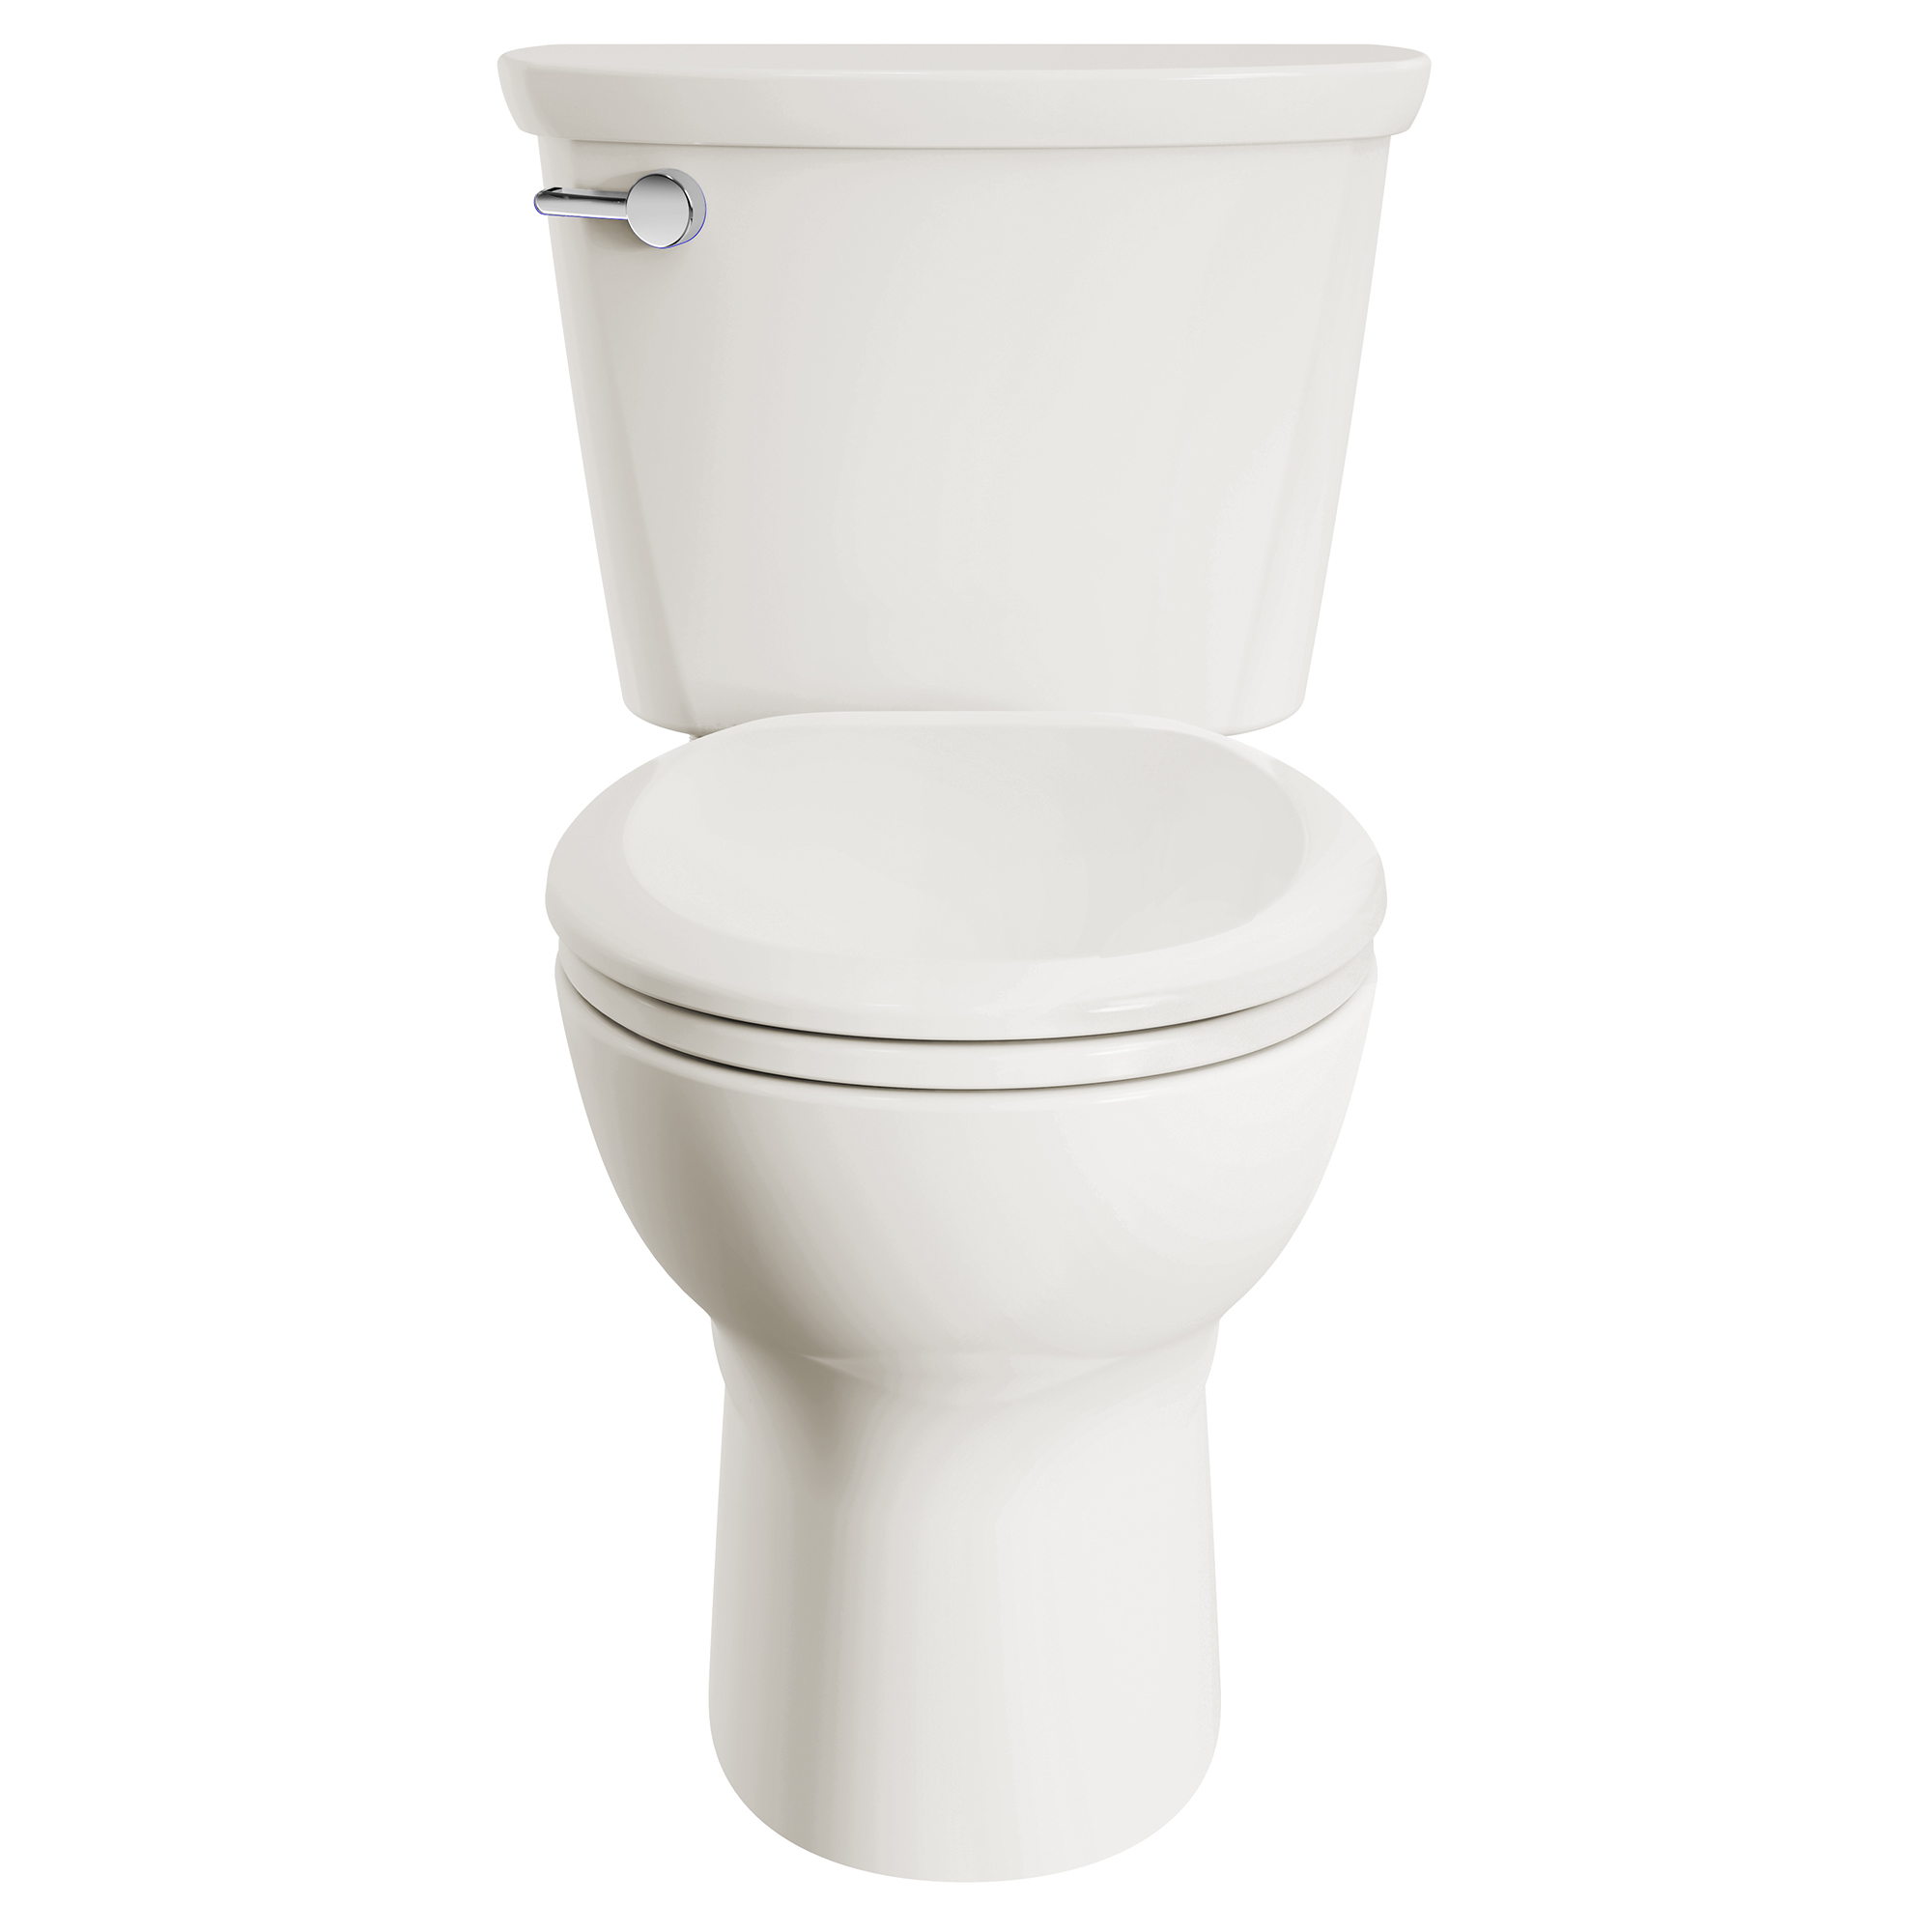 Cadet™ PRO Two-Piece 1.6 gpf/6.0 Lpf  Standard Height Round Front 10-Inch Rough Toilet Less Seat